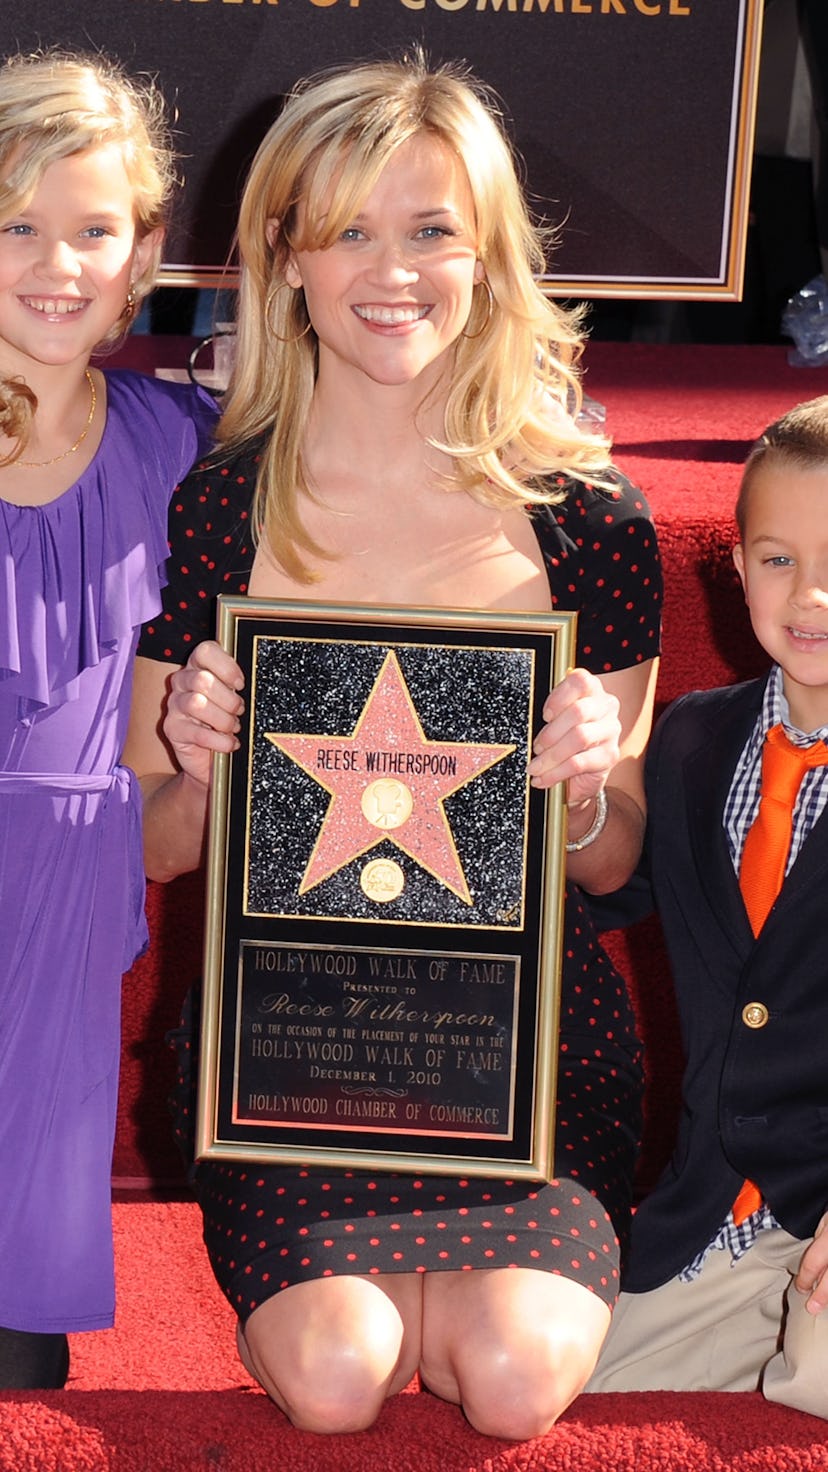 Reese Witherspoon, Ava Phillippe, and Deacon Phillippe posed on the Hollywood Walk of Fame in Decemb...